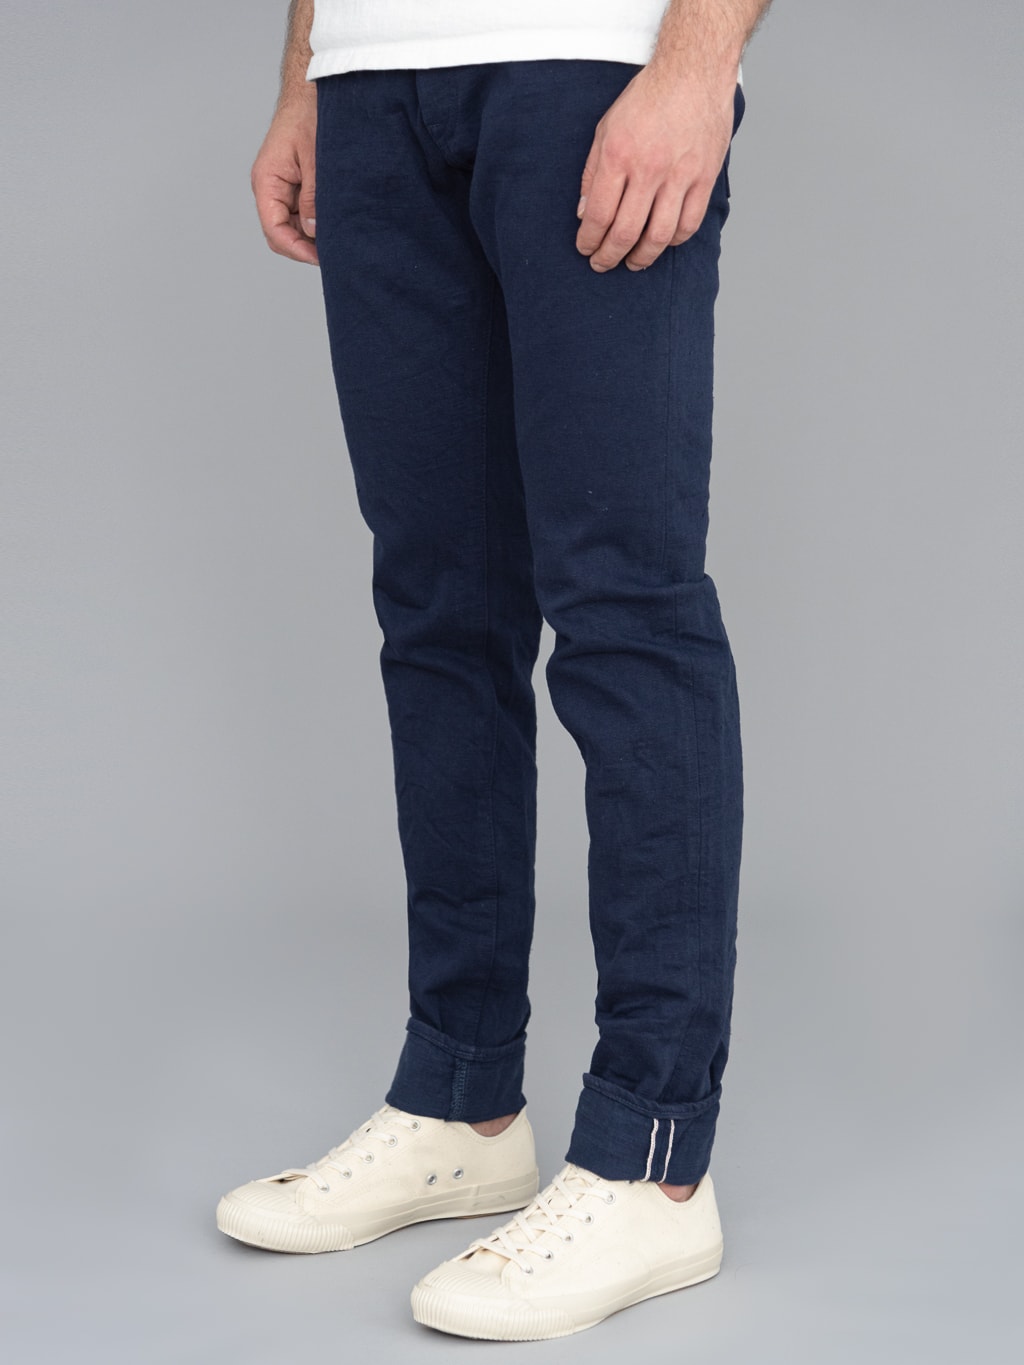 ONI Denim 612 Super Low Tension Navy Relaxed Tapered Jeans side fit